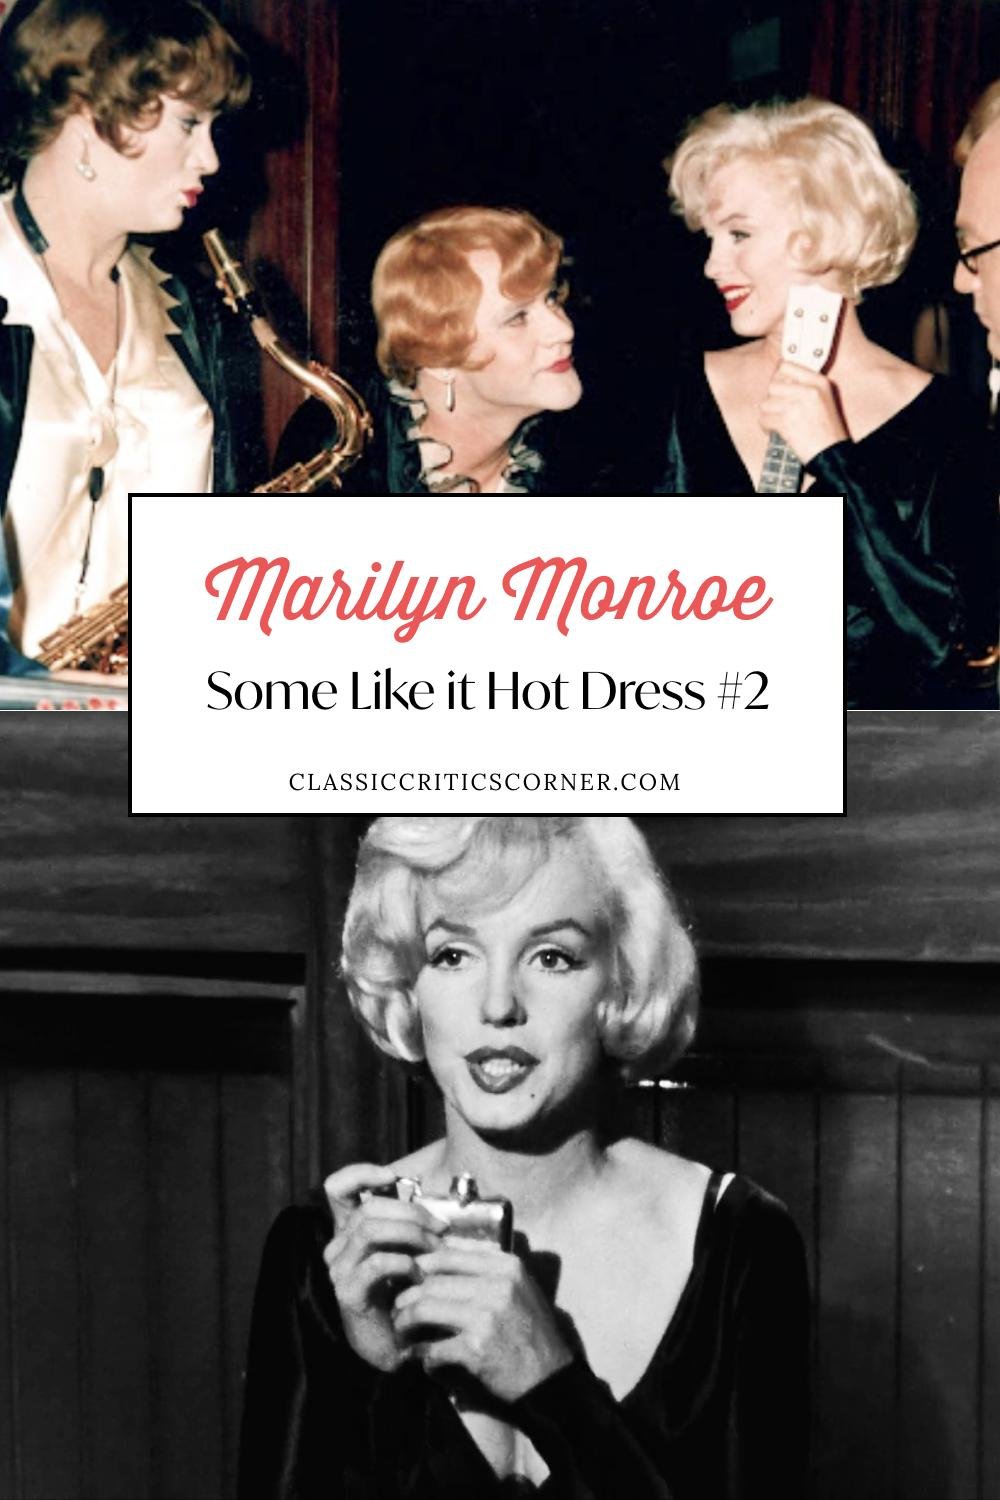 JCPenney Designs Limited-Edition Collection Inspired by Marilyn Monroe's  Off-Duty Looks